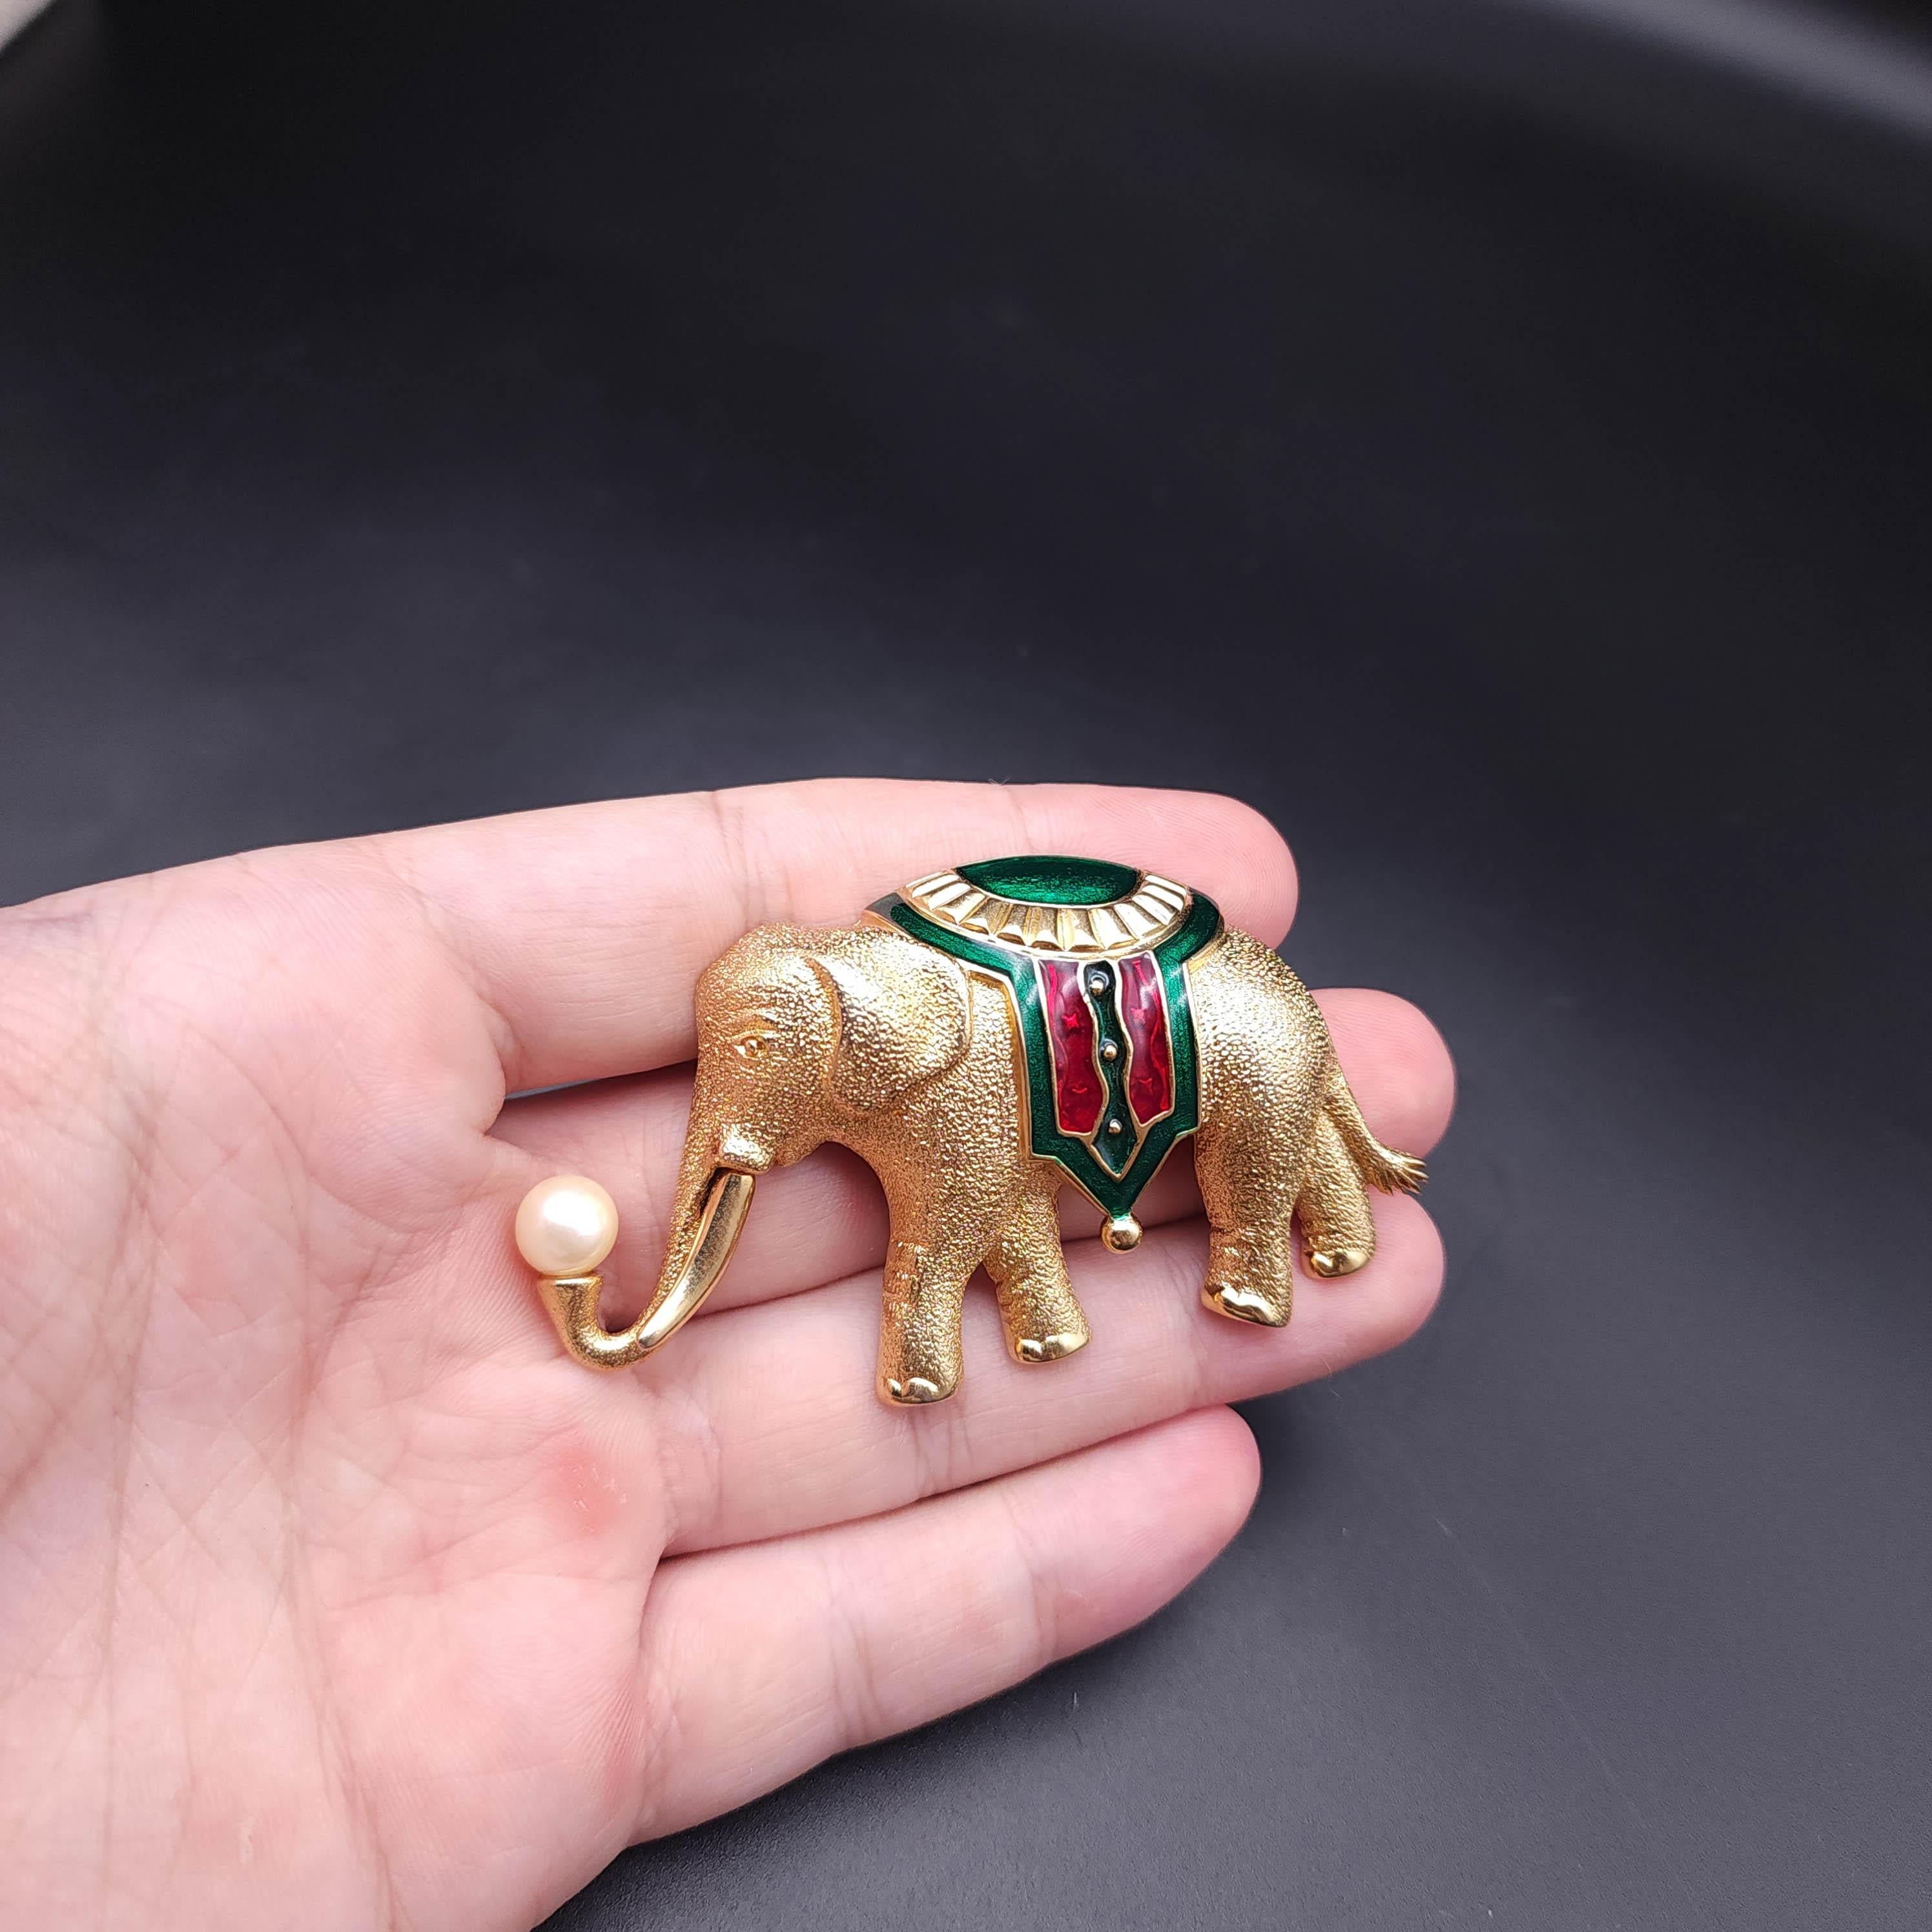 Women's or Men's Monet Elephant Brooch with Faux Pearl and Enamel Accents, Vintage, Gold Filled For Sale